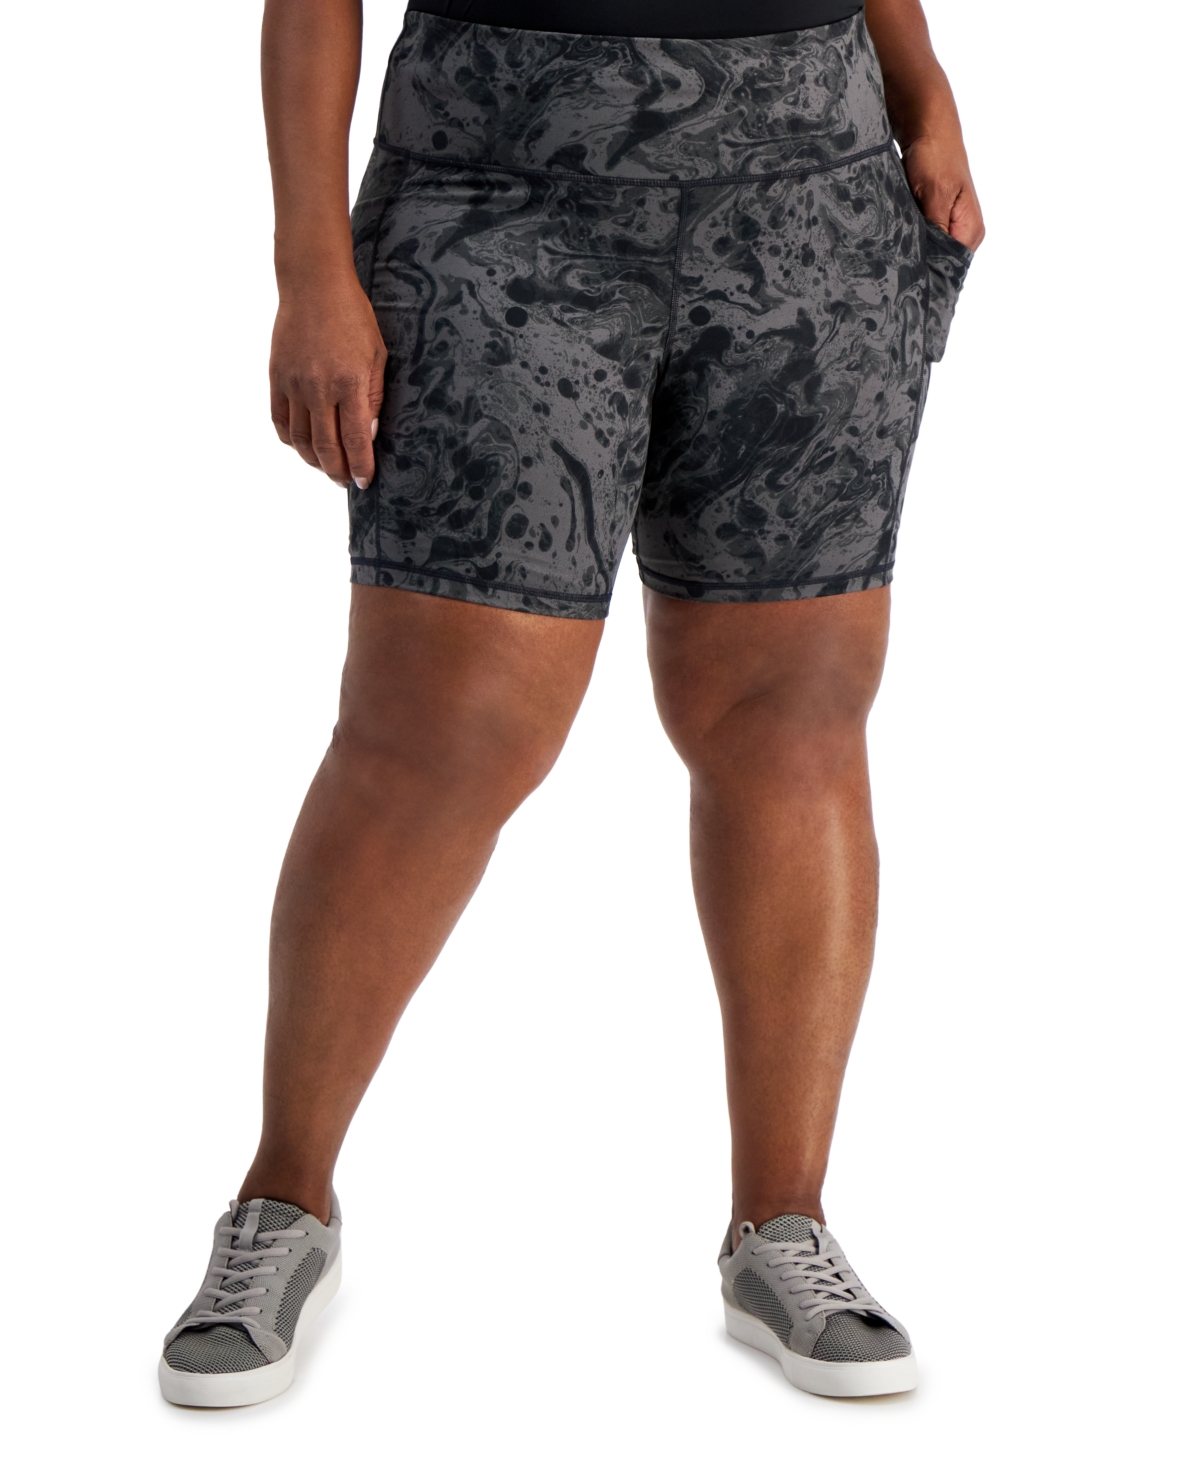 Plus Size Water Bubble Bike Shorts, Created for Macy's - Deep Black